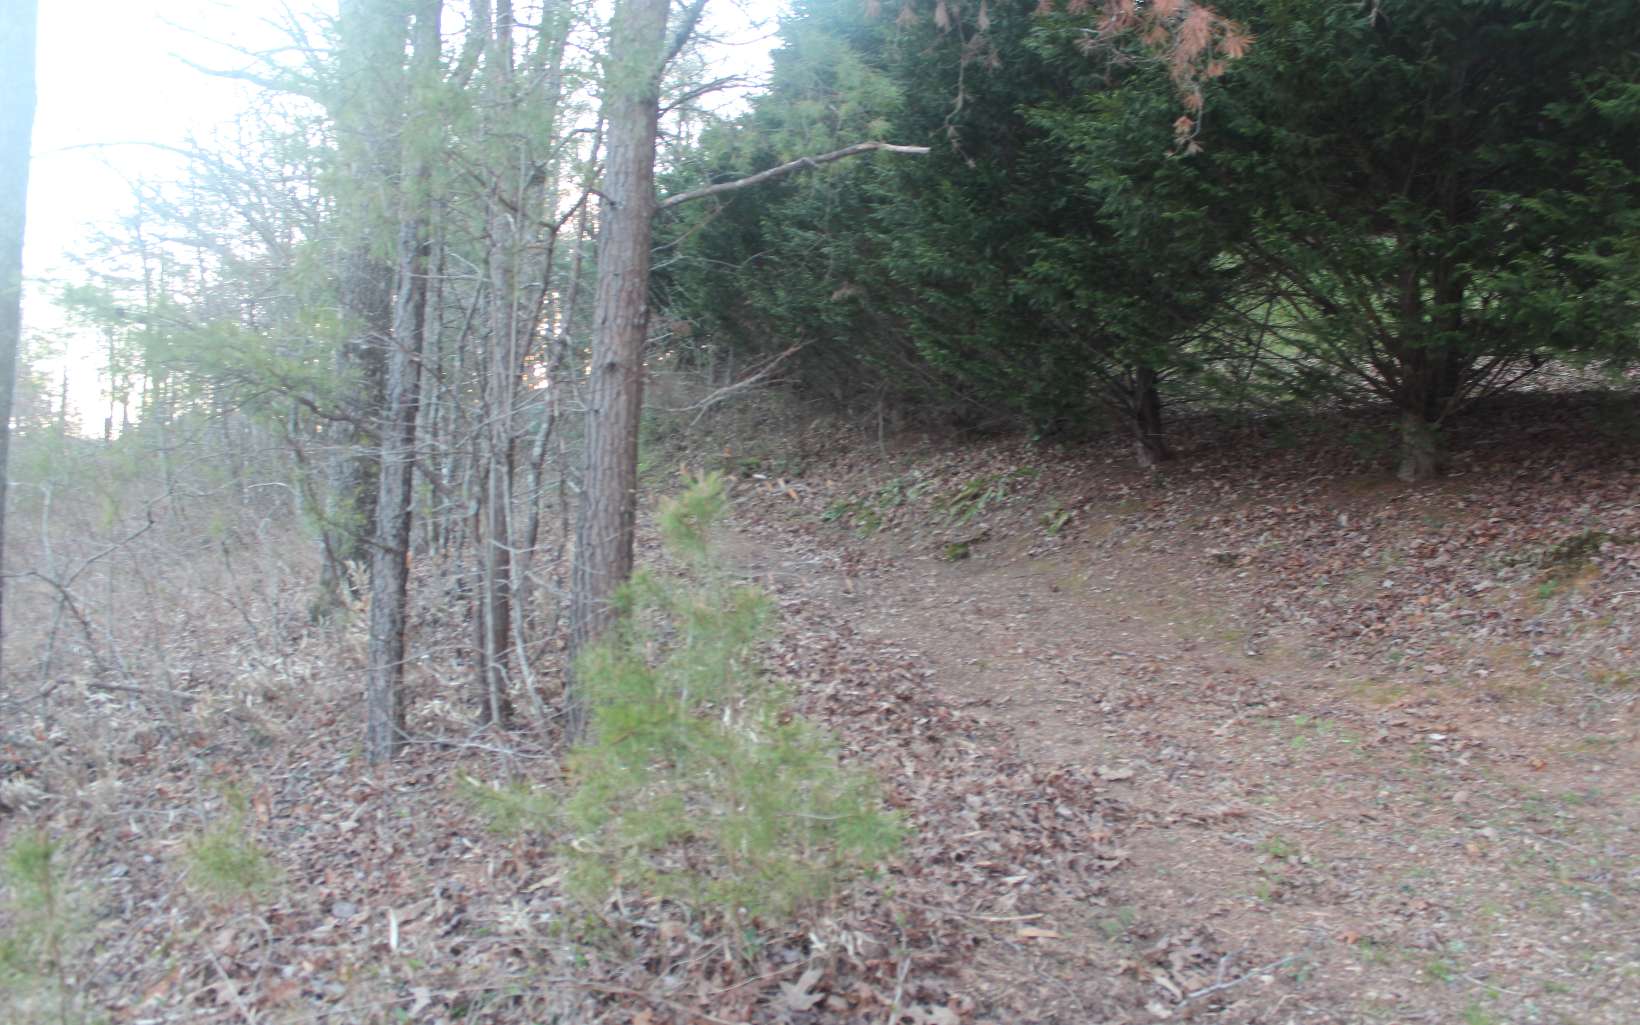 Build your dream home on this 1 acre wooded lot. Gentle slope and with some clearing of the trees will have Awesome views. Underground utilities, county water available, paved roads and easy access to property. Conveniently located close to Lake Chatuge, public boat ramp, nice restaurants, and shopping. Very easy to build on.